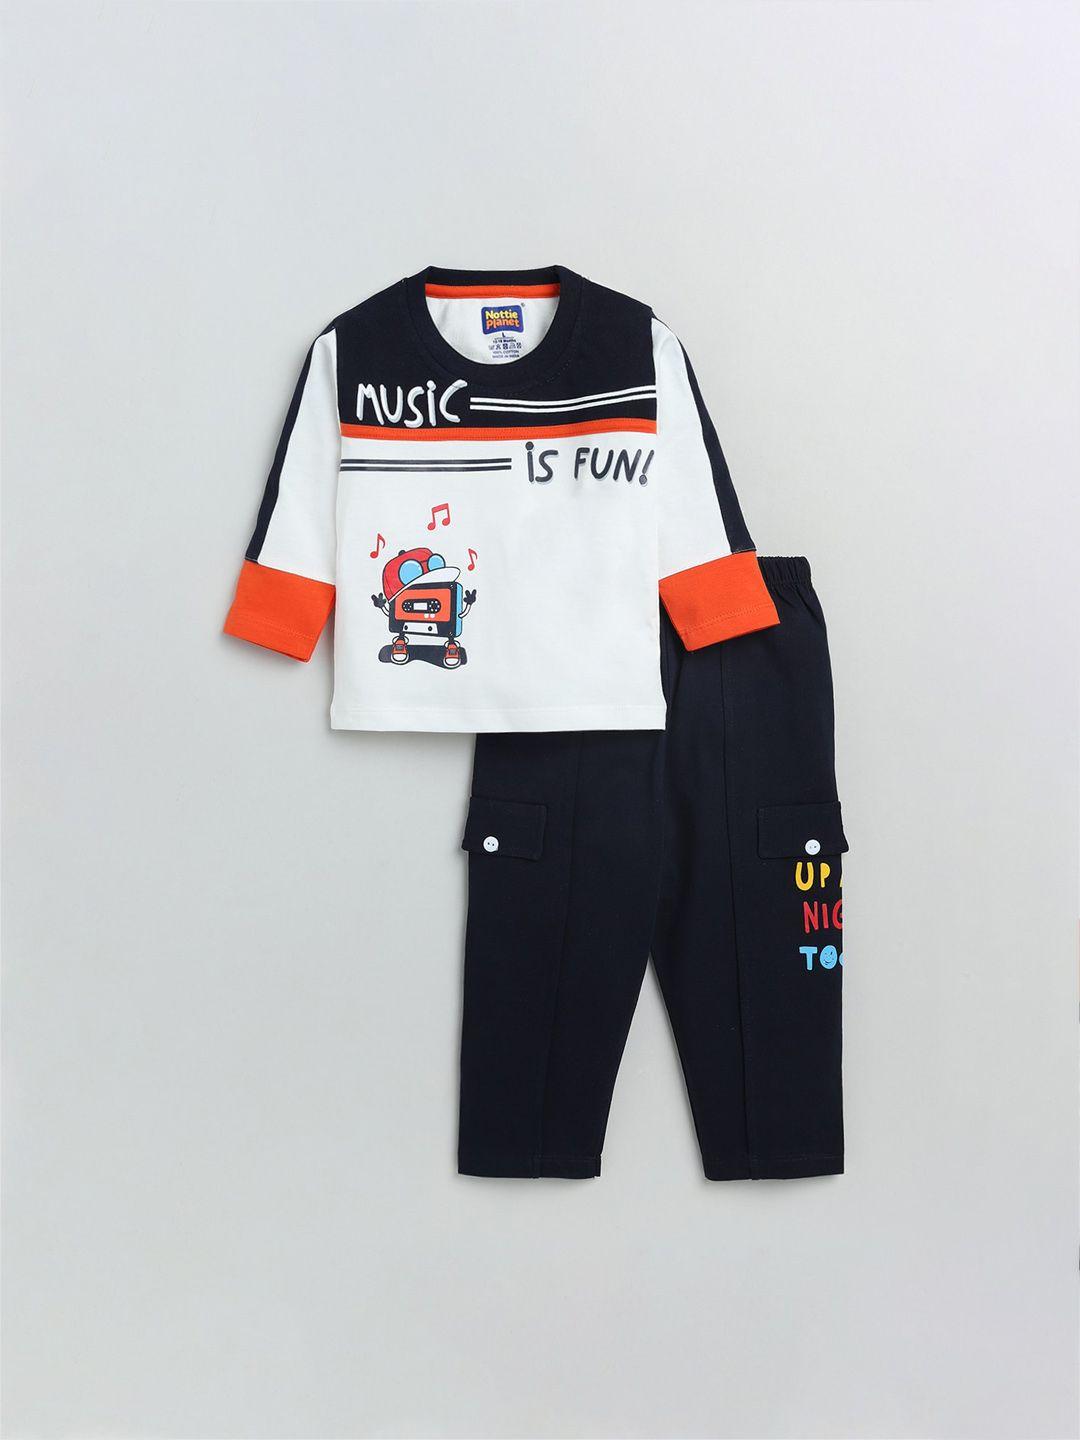 nottie planet boys pure cotton navy blue & white printed t-shirt with trousers